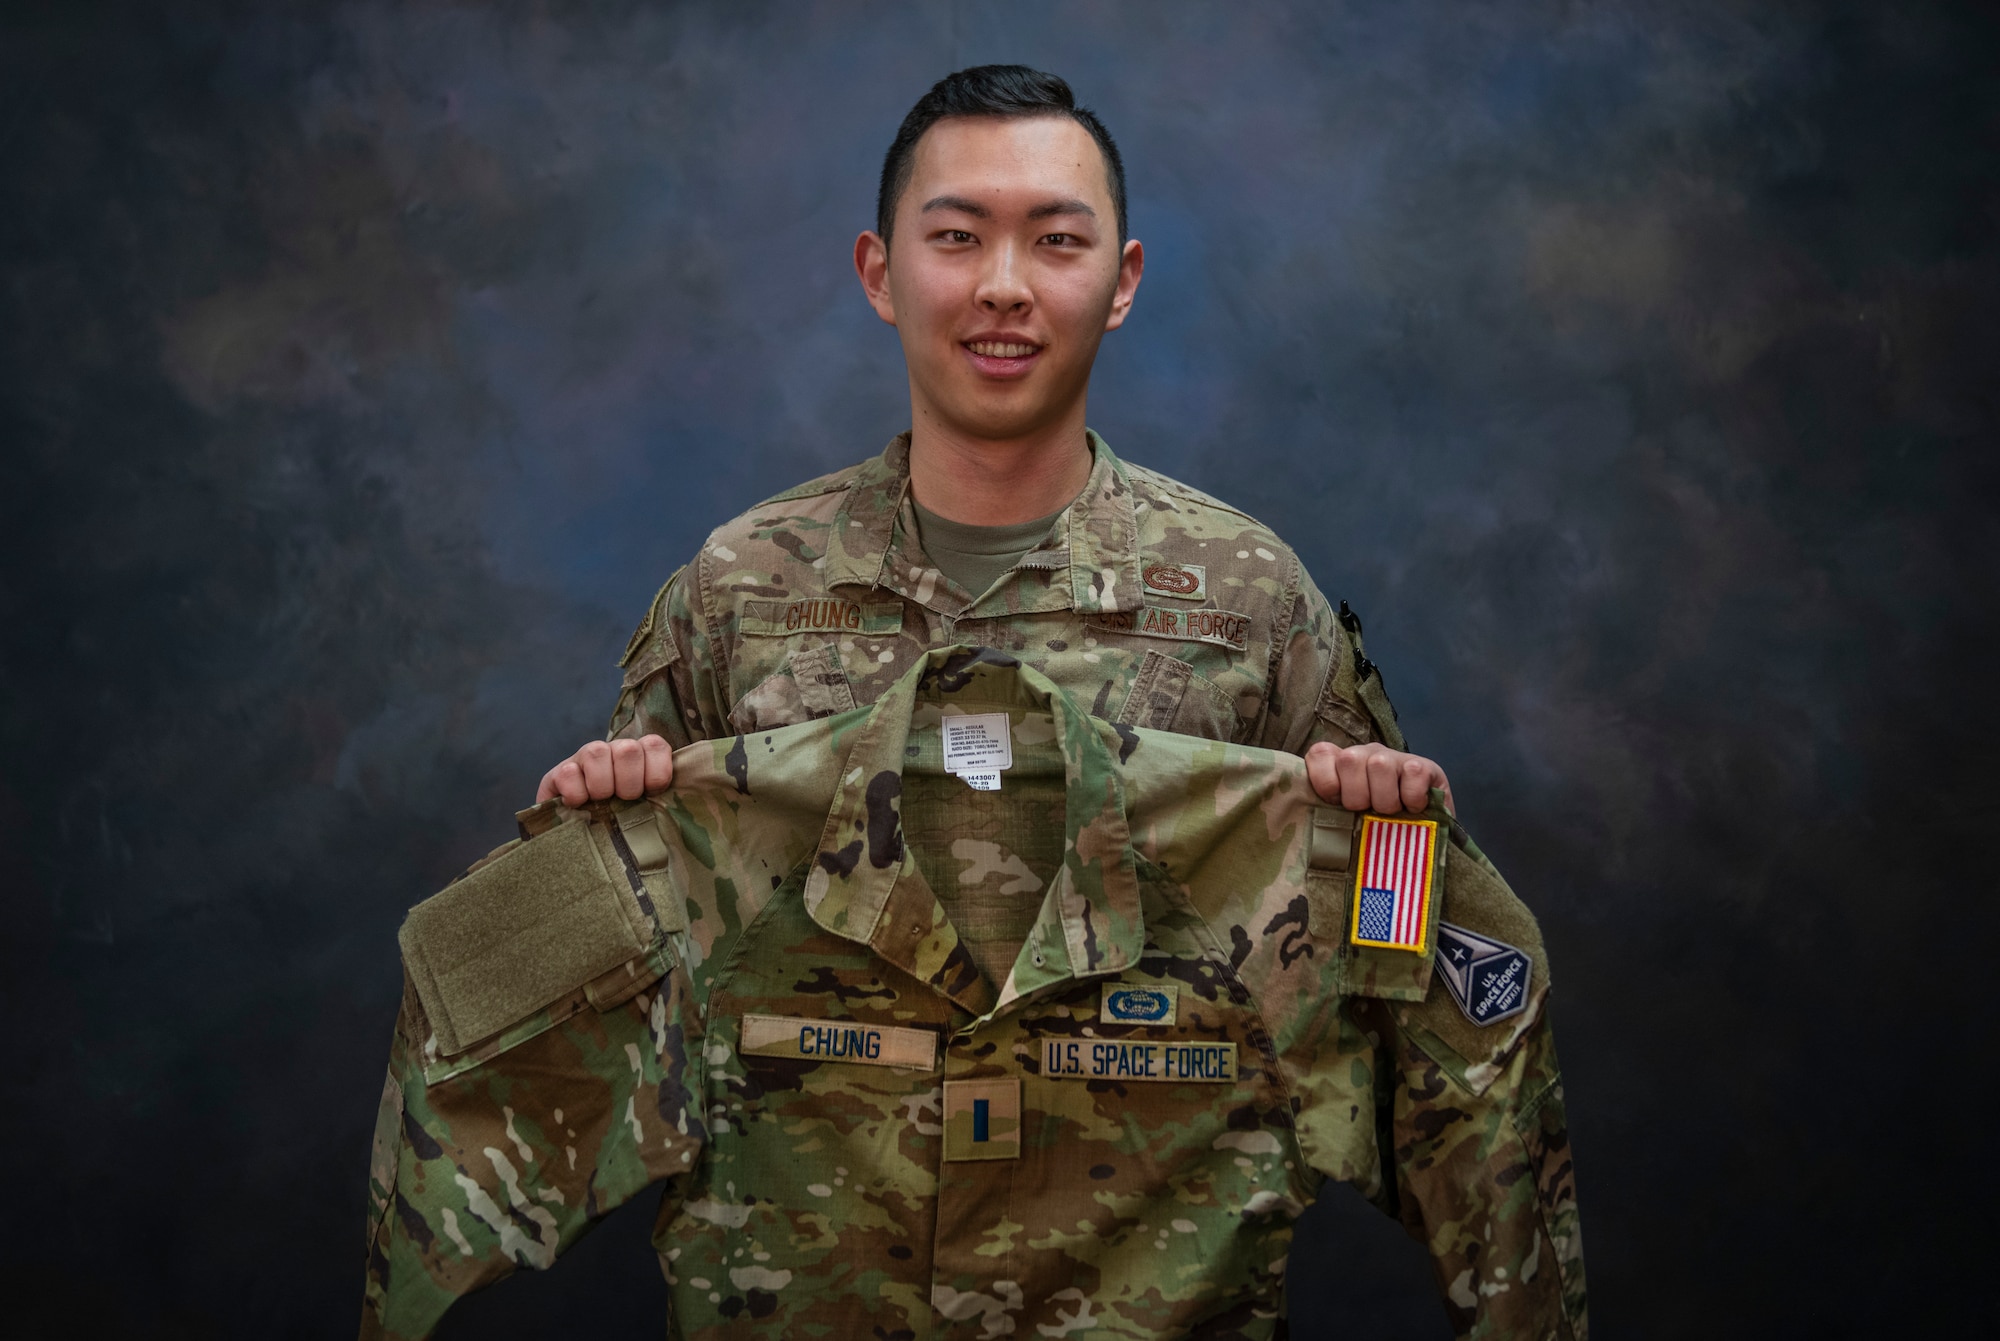 1st Lt. Issac Chung, 97th Operations Support Squadron officer in charge of intelligence operations, shows his uniform with U.S. Space Force (USSF) name tapes on Jan. 13, 2020, at Altus Air Force Base, Oklahoma. Chung applied to transfer into the USSF in May of 2020 and learned he’d been accepted in October of 2020. He is slated to swear in to the USSF on Feb. 4, 2021. (U.S. Air Force photo by Airman 1st Class Amanda Lovelace)